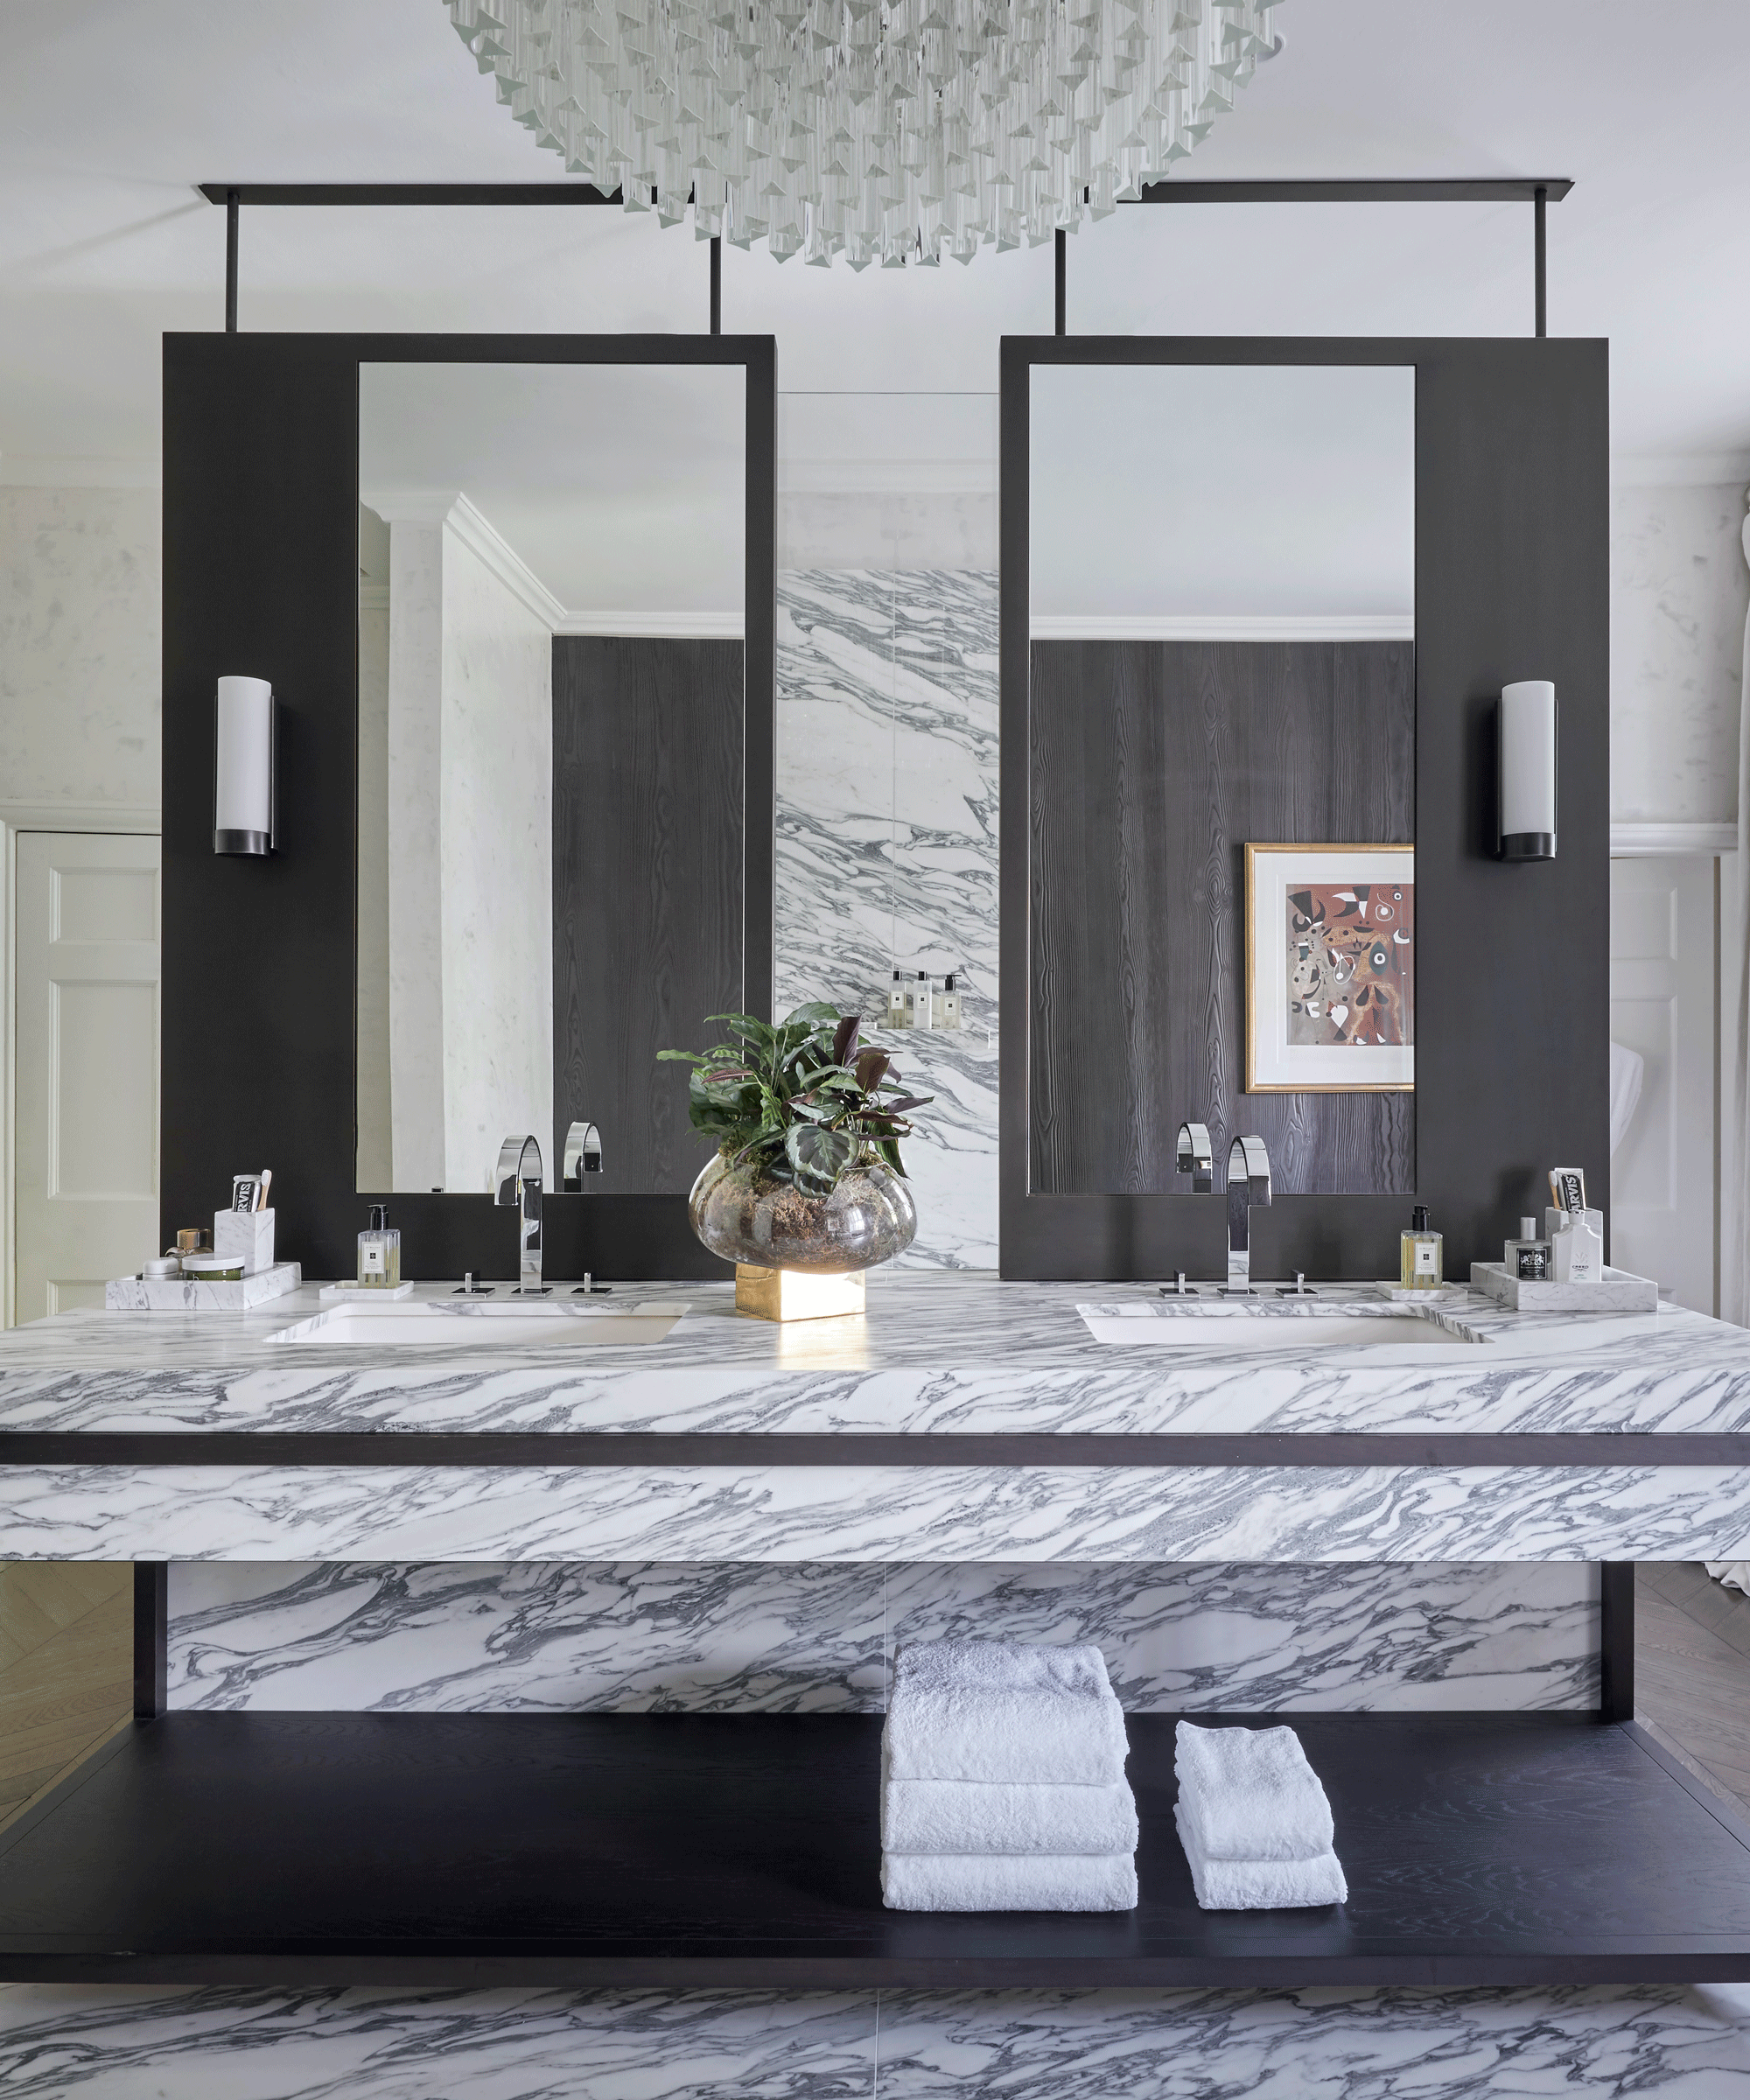 A marble bathroom double vanity unit with large matching wall mirrors and towel storage below